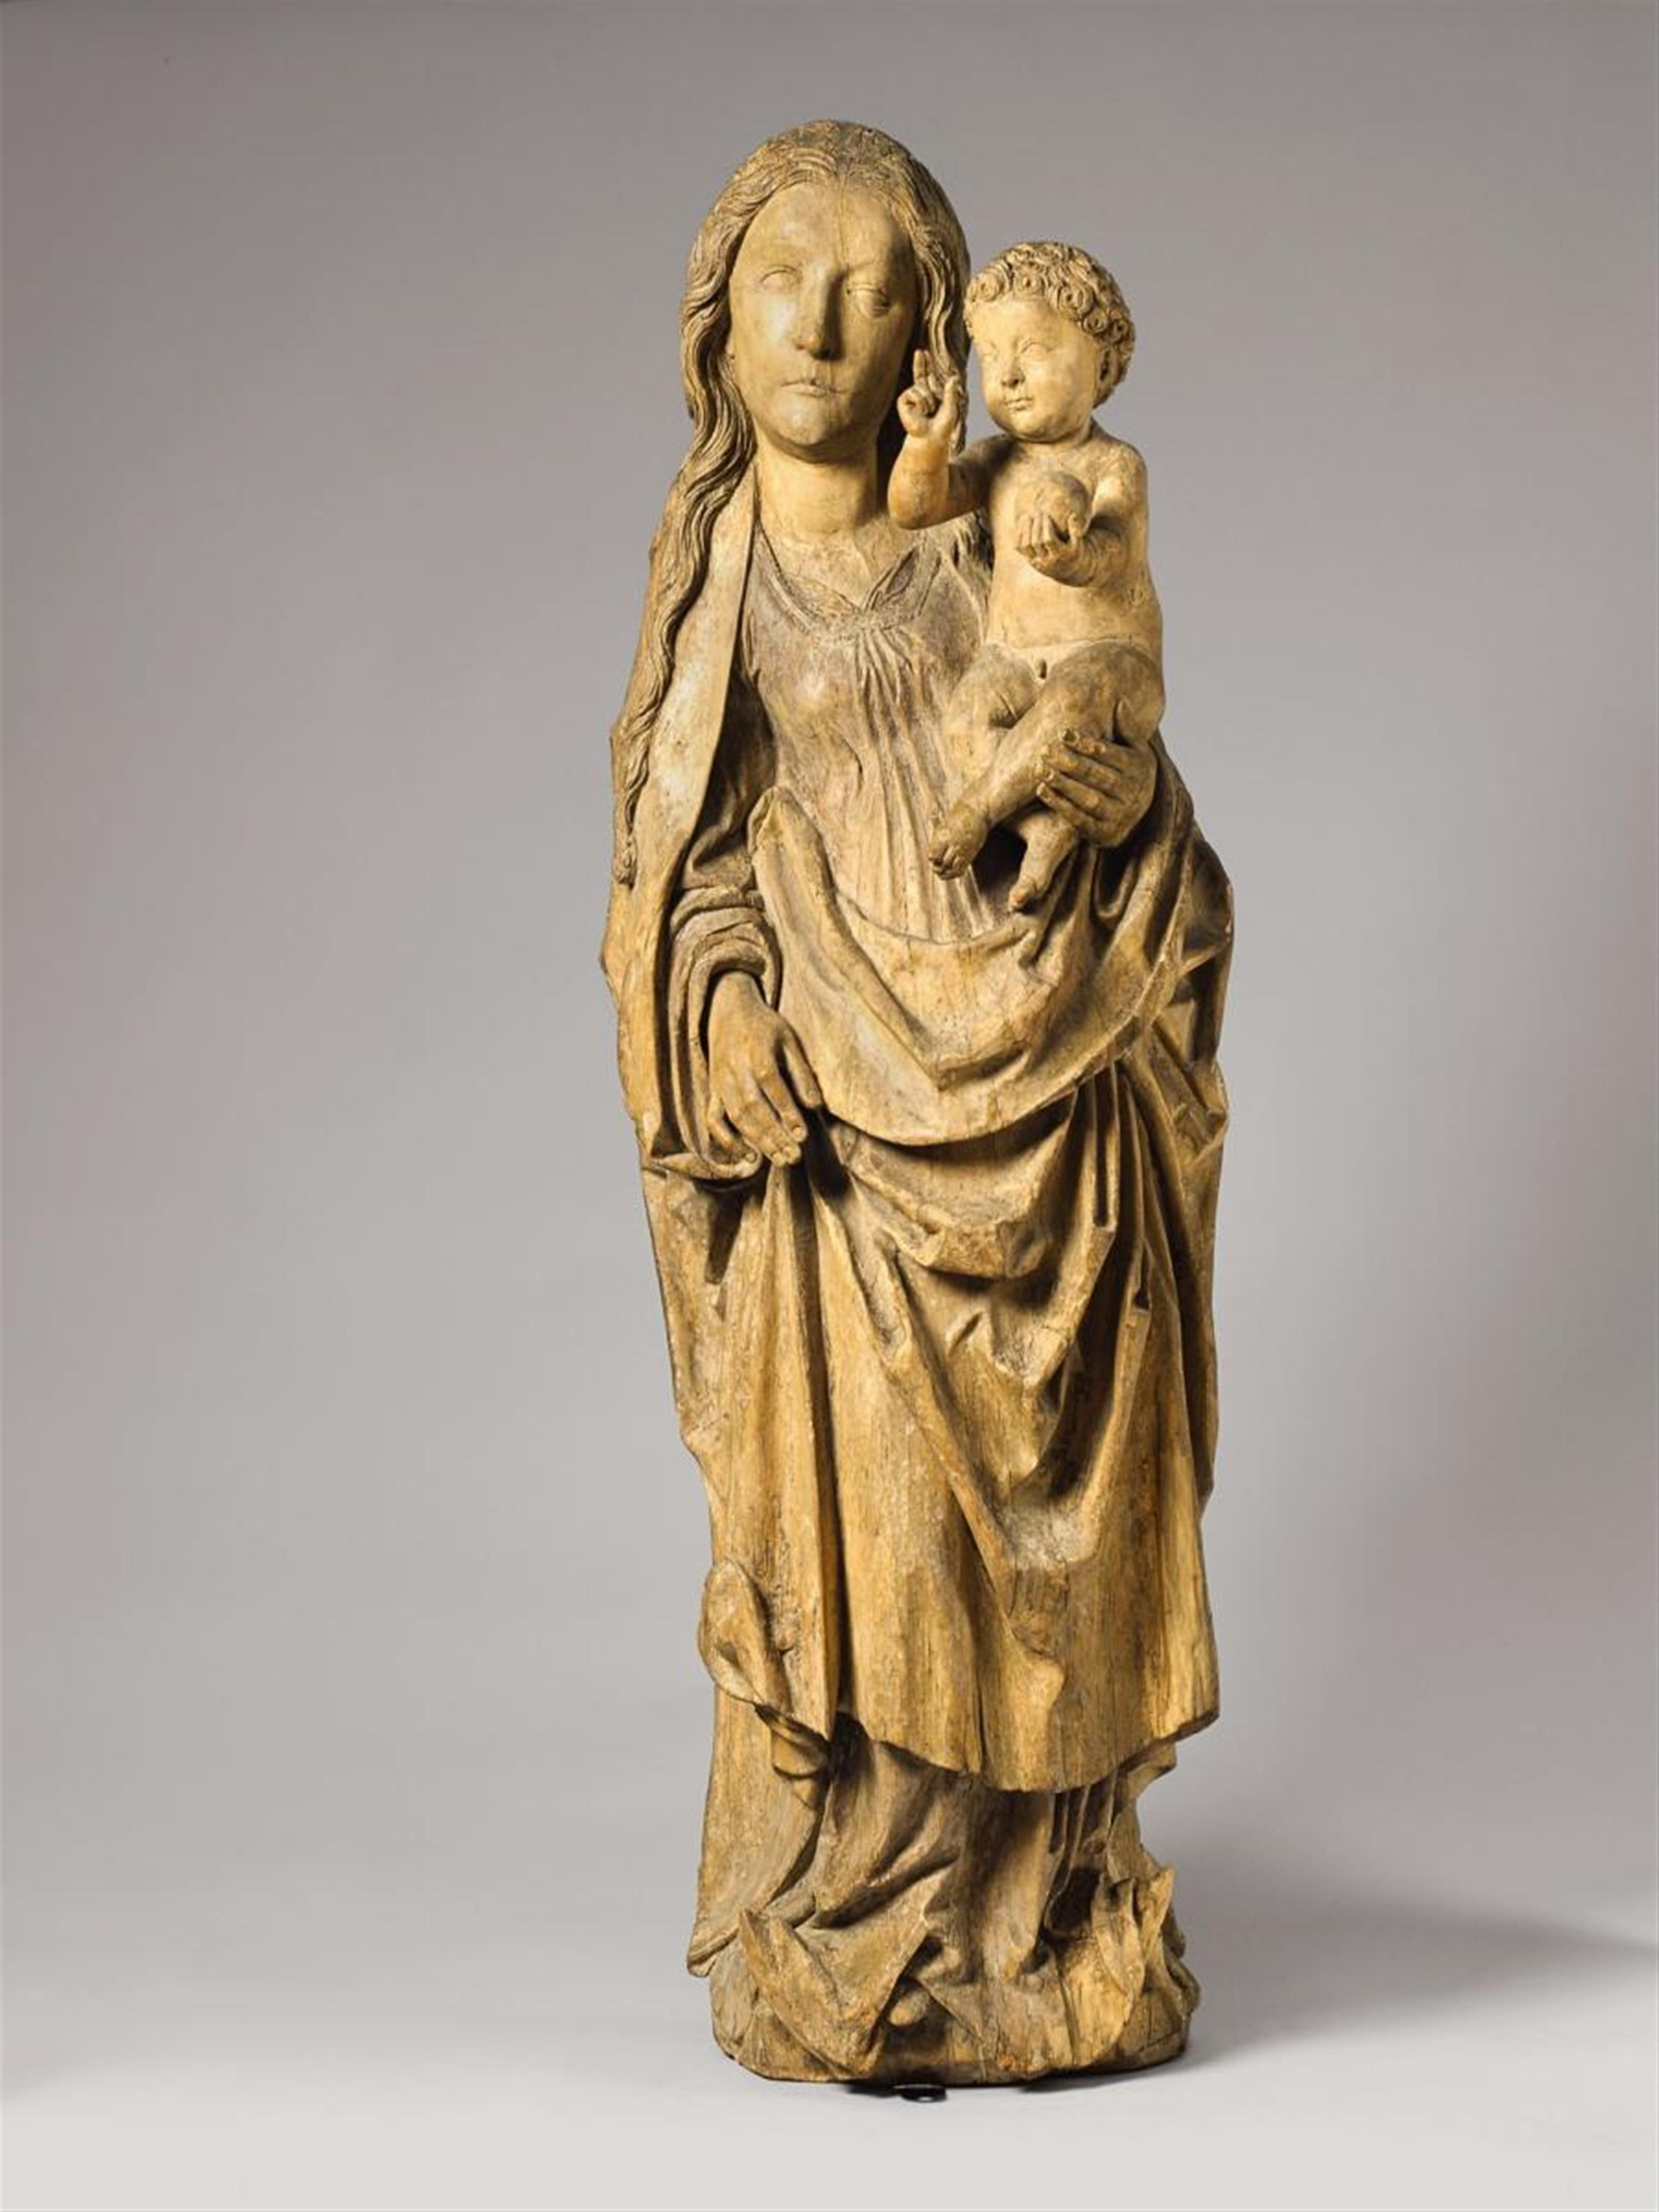 Tilman Riemenschneider, circle of - AN EARLY 16TH CENTURY WOOD FIGURE OF THE VIRGIN WITH CHILD FROM THE CIRCLE OF TILMAN RIEMENSCHNEID - image-1